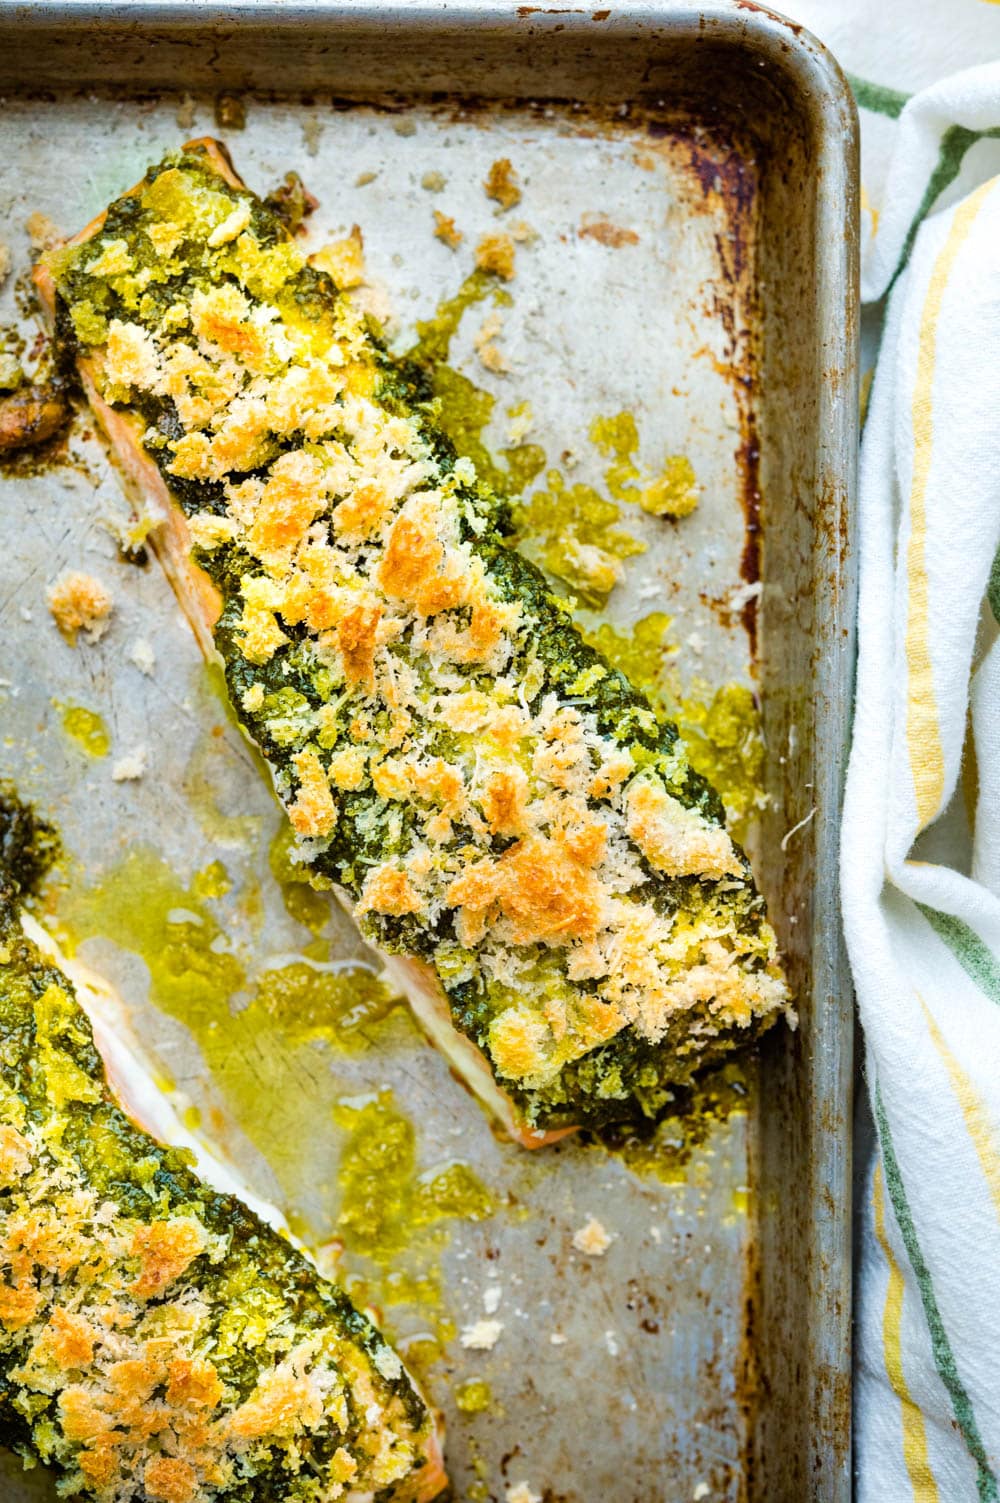 Pesto Baked Salmon hot from the oven.